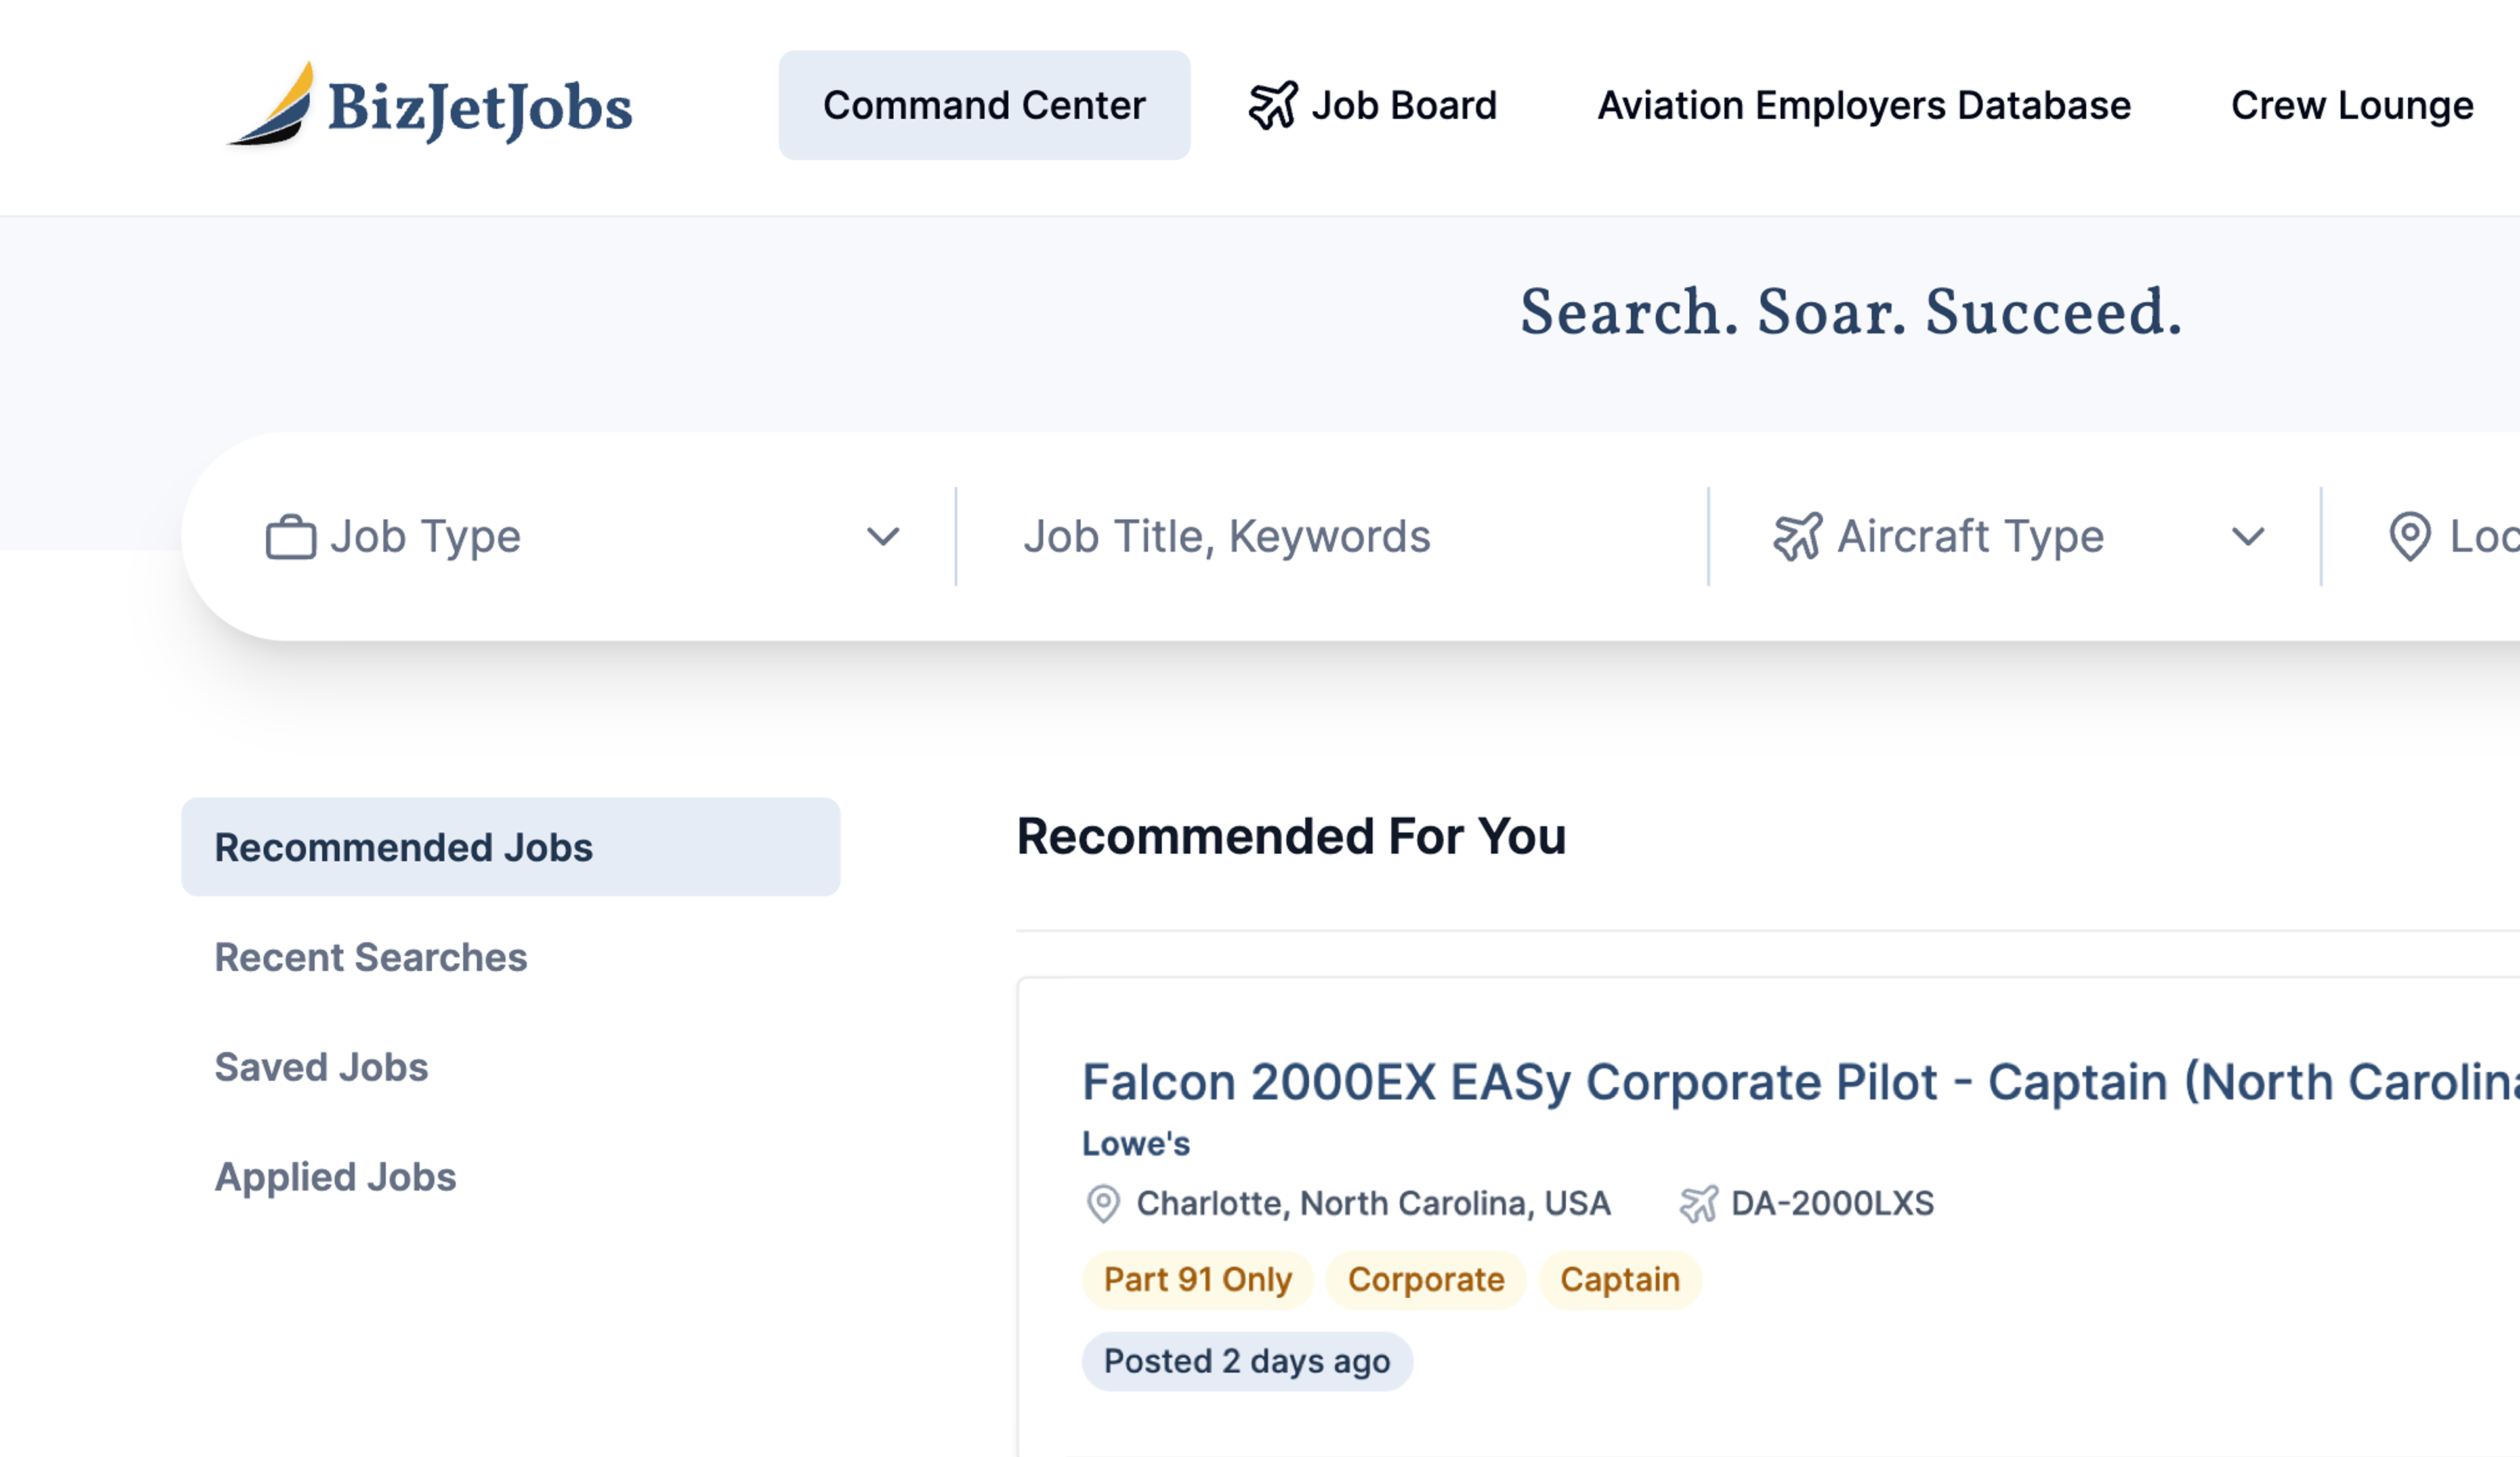 New Feature Alert:  Recommended Jobs